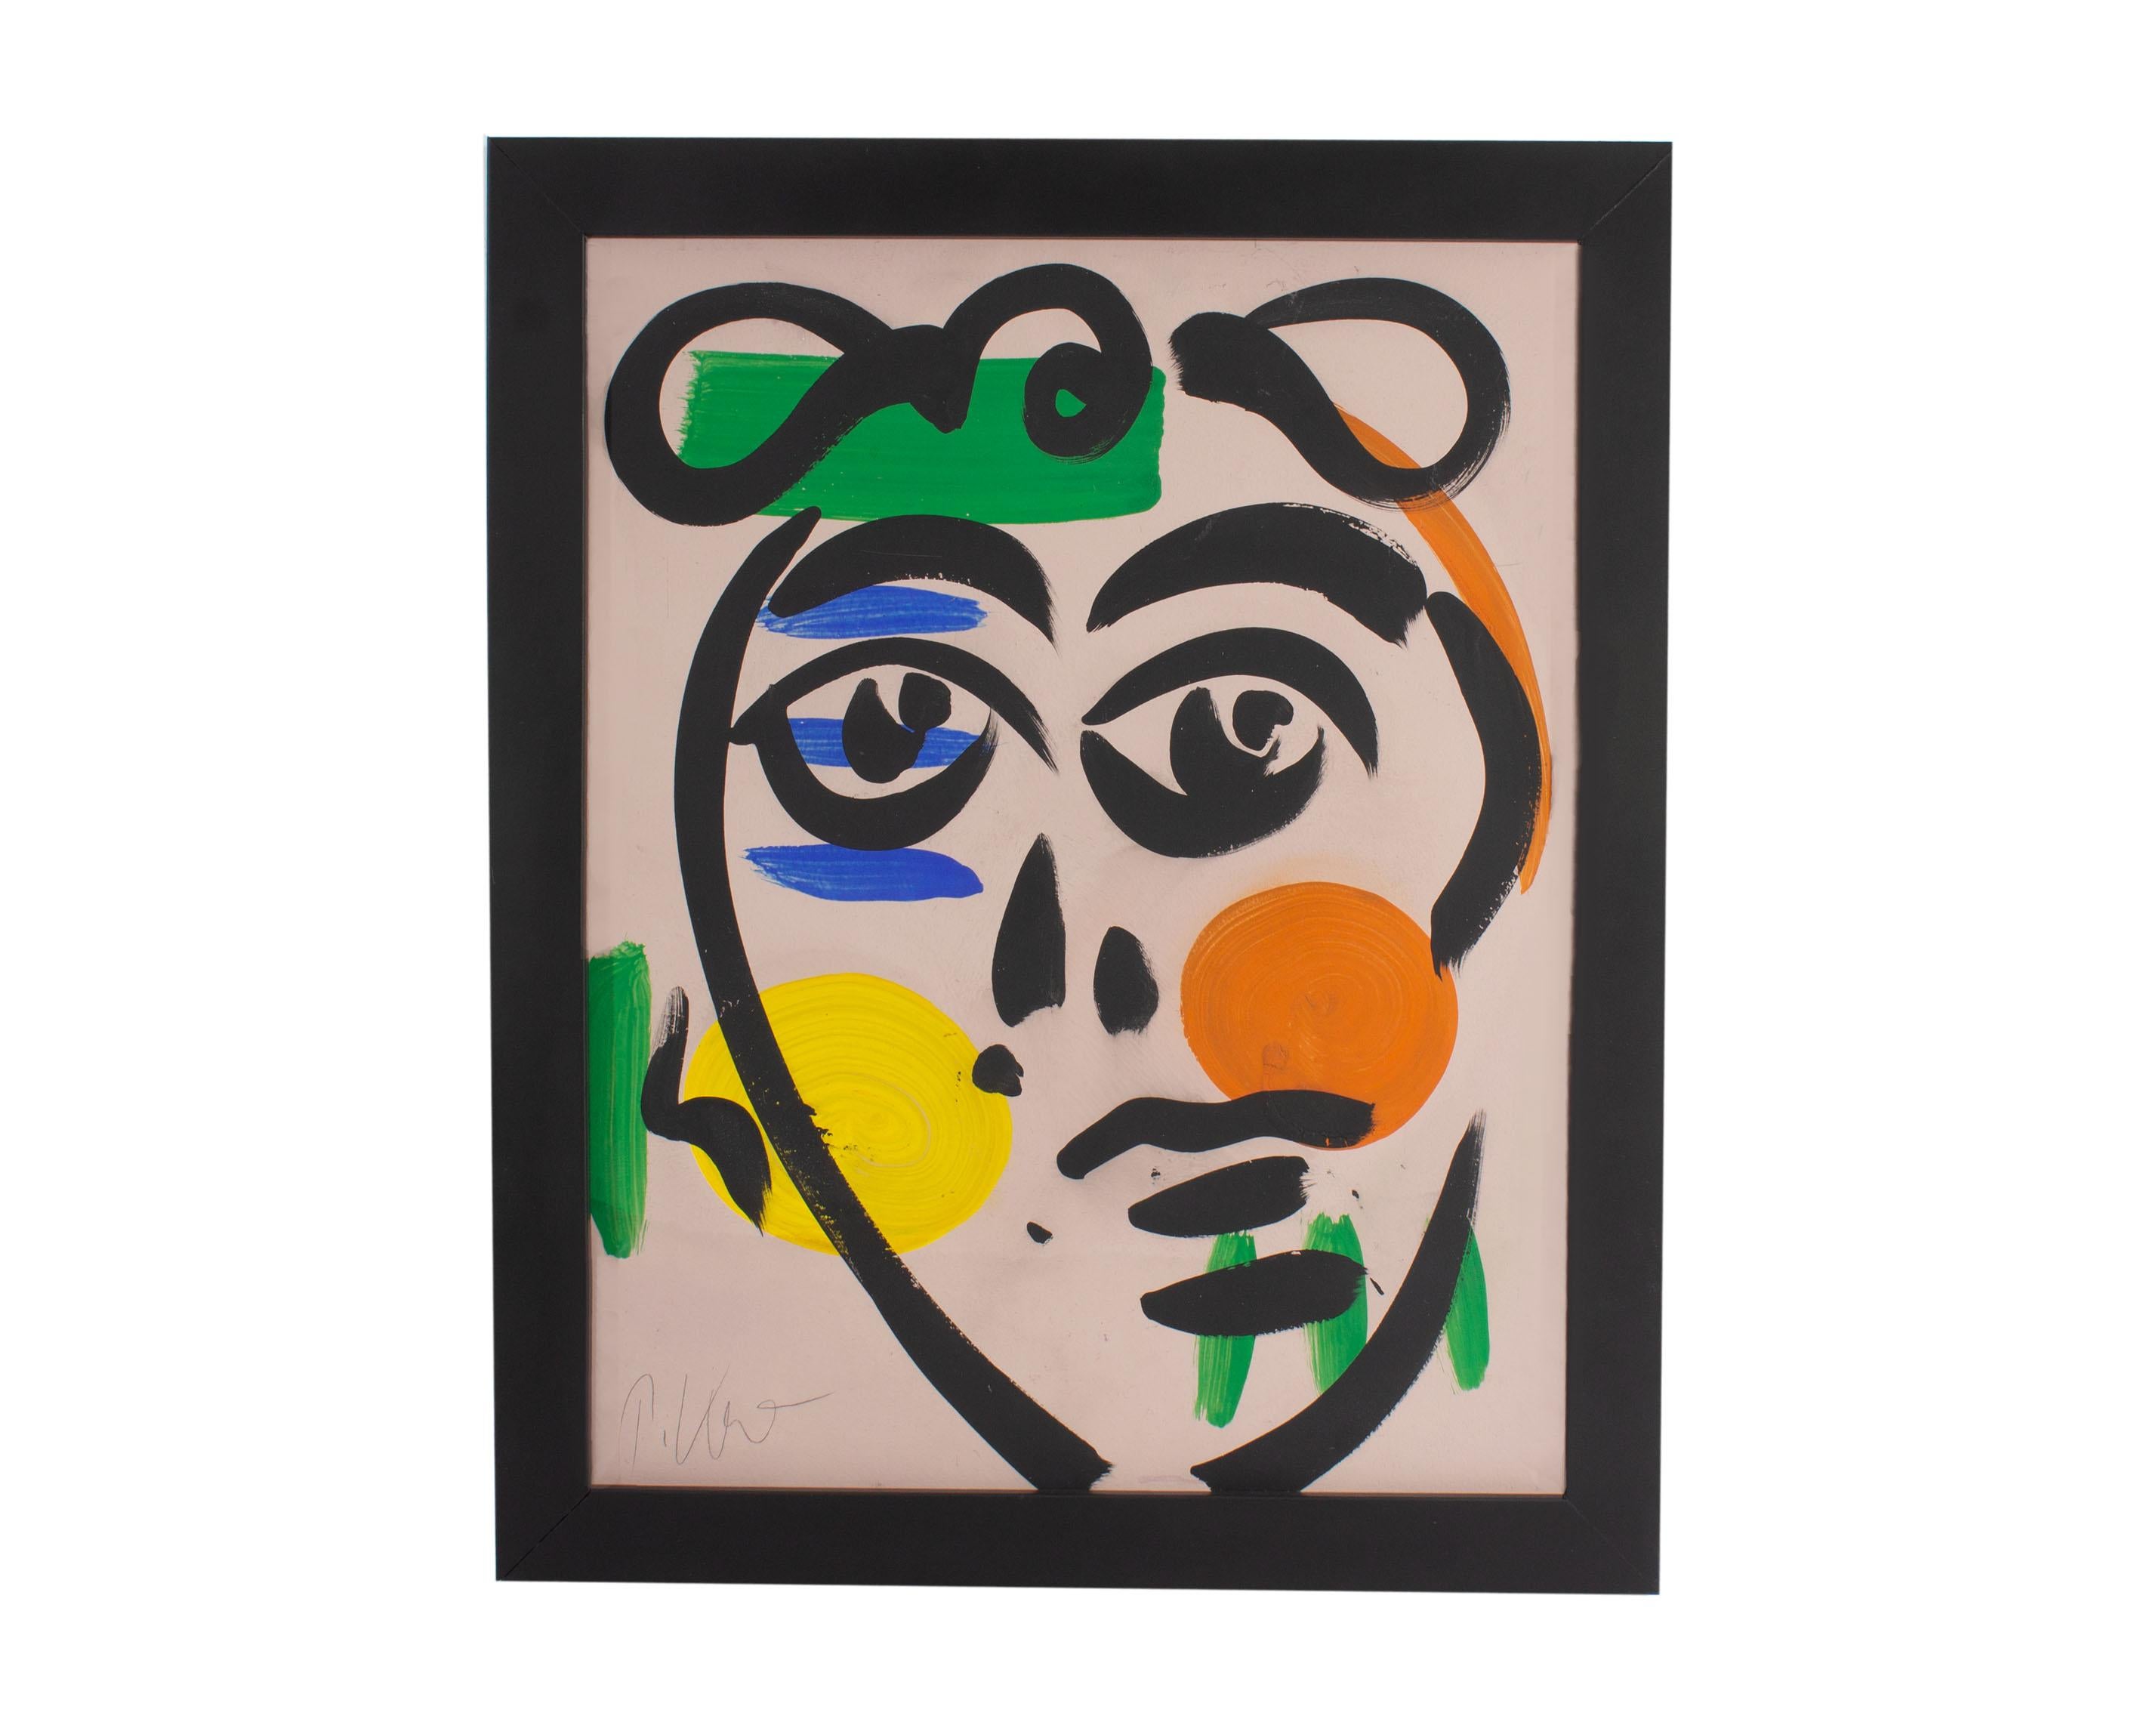 An abstract portrait tempera painting signed by German artist Peter Keil (born 1942). Signed to the lower left corner, this composition depicts an abstract portrait composed of broad black brushstrokes upon a white ground. Orange, yellow, green, and